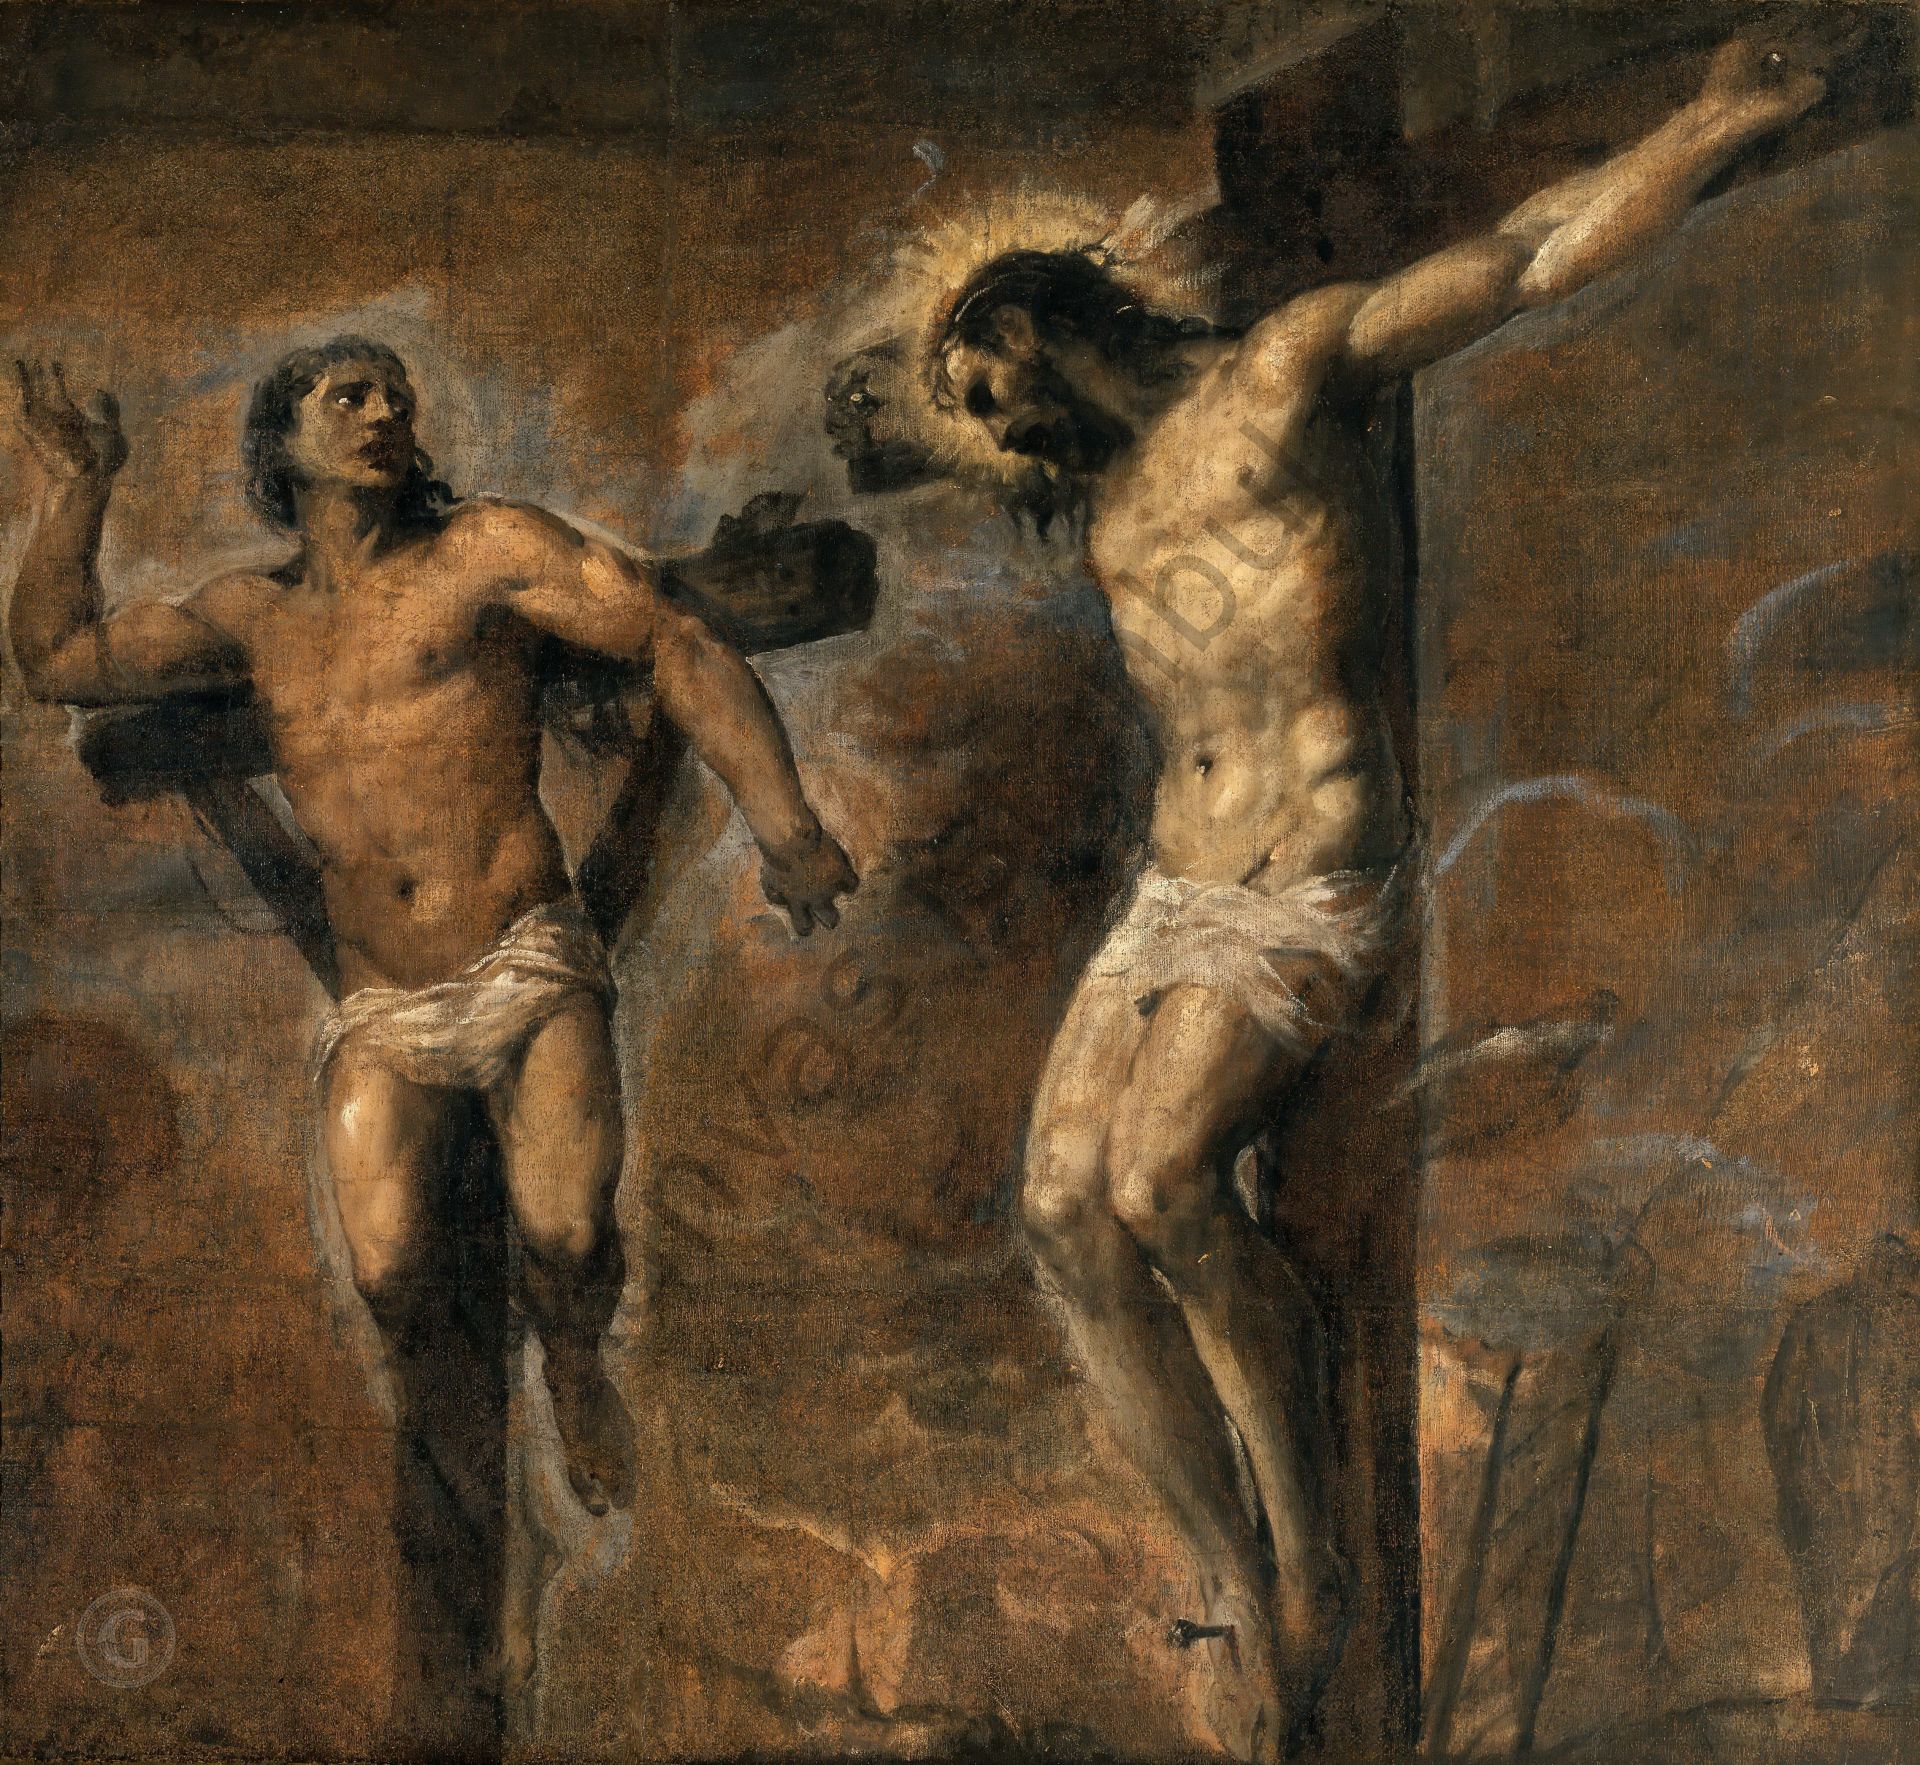 Jesus Christ and the Good Thief